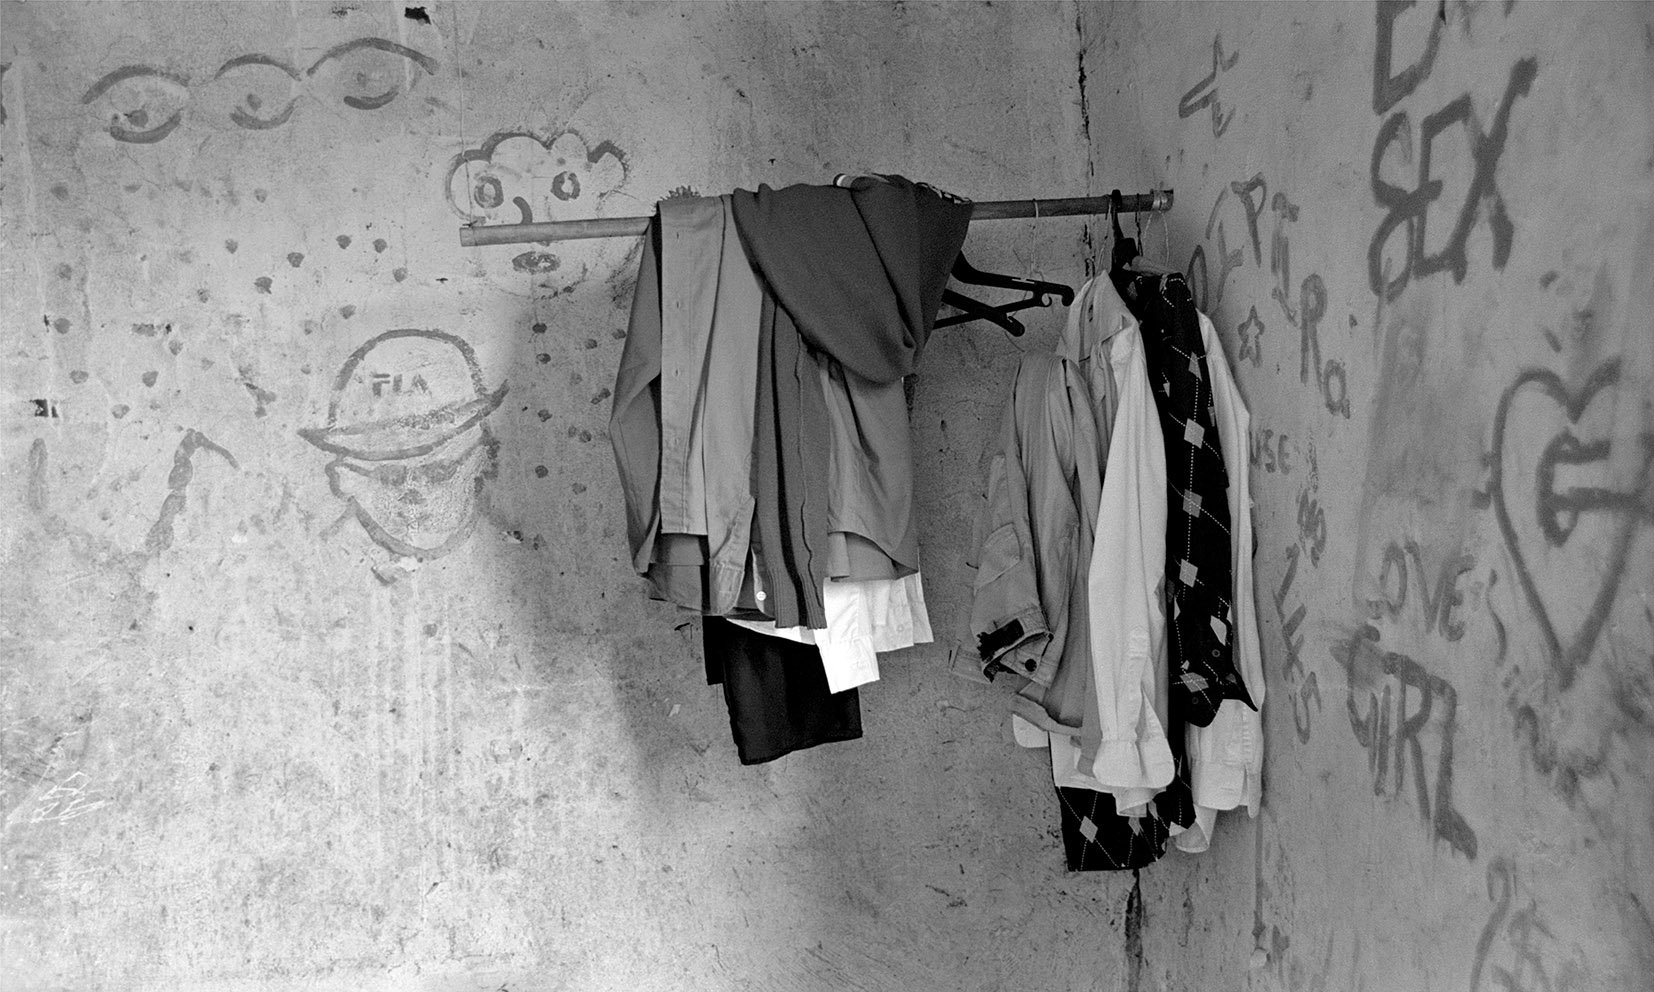  Mkansi household, bedroom with graffiti and the clothes of their late parents/ 2007 